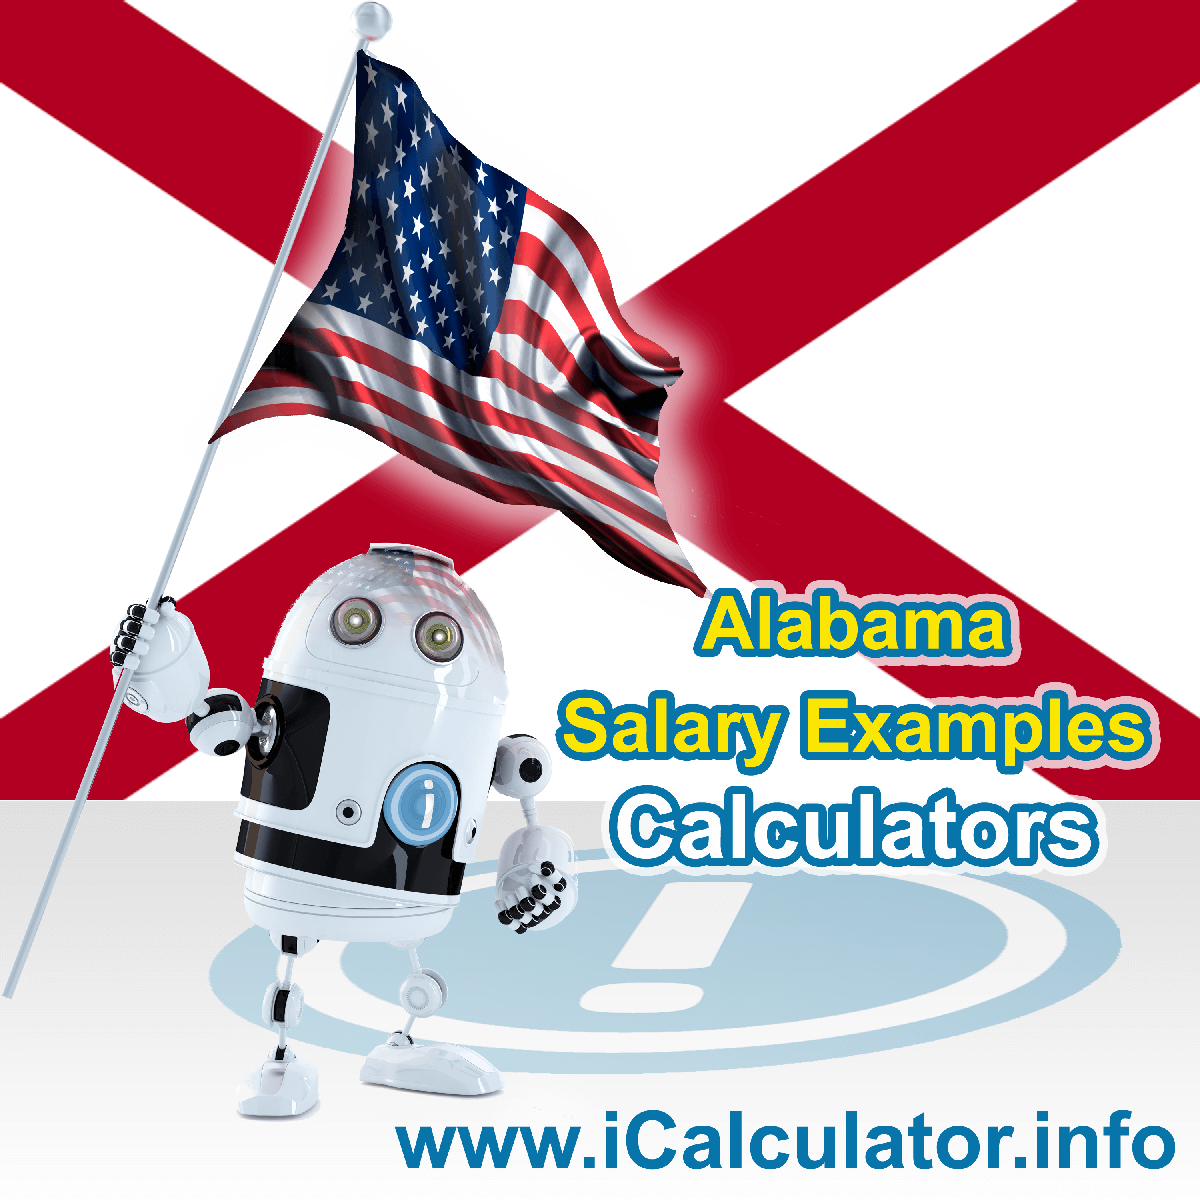 Alabama Salary Example for $ 210,000.00 in 2023 | iCalculator™ | $ 210,000.00 salary example for employee and employer paying Alabama State tincome taxes. Detailed salary after tax calculation including Alabama State Tax, Federal State Tax, Medicare Deductions, Social Security, Capital Gains and other income tax and salary deductions complete with supporting Alabama state tax tables 